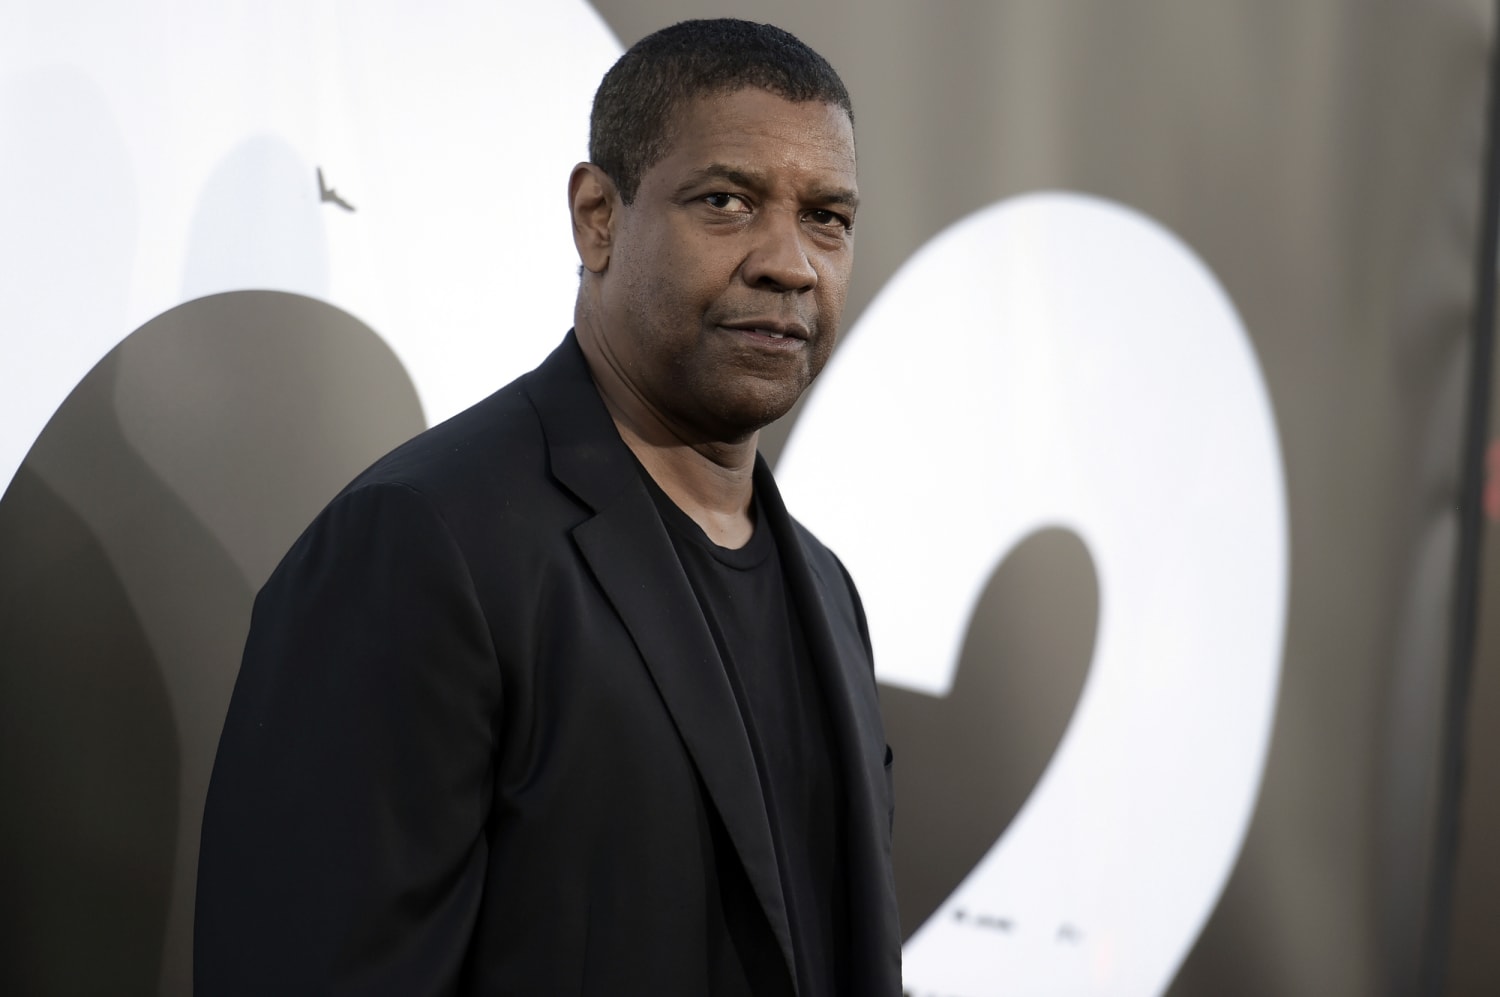 Equalizer 2' squeaks past 'Mamma Mia 2' to lead the box office